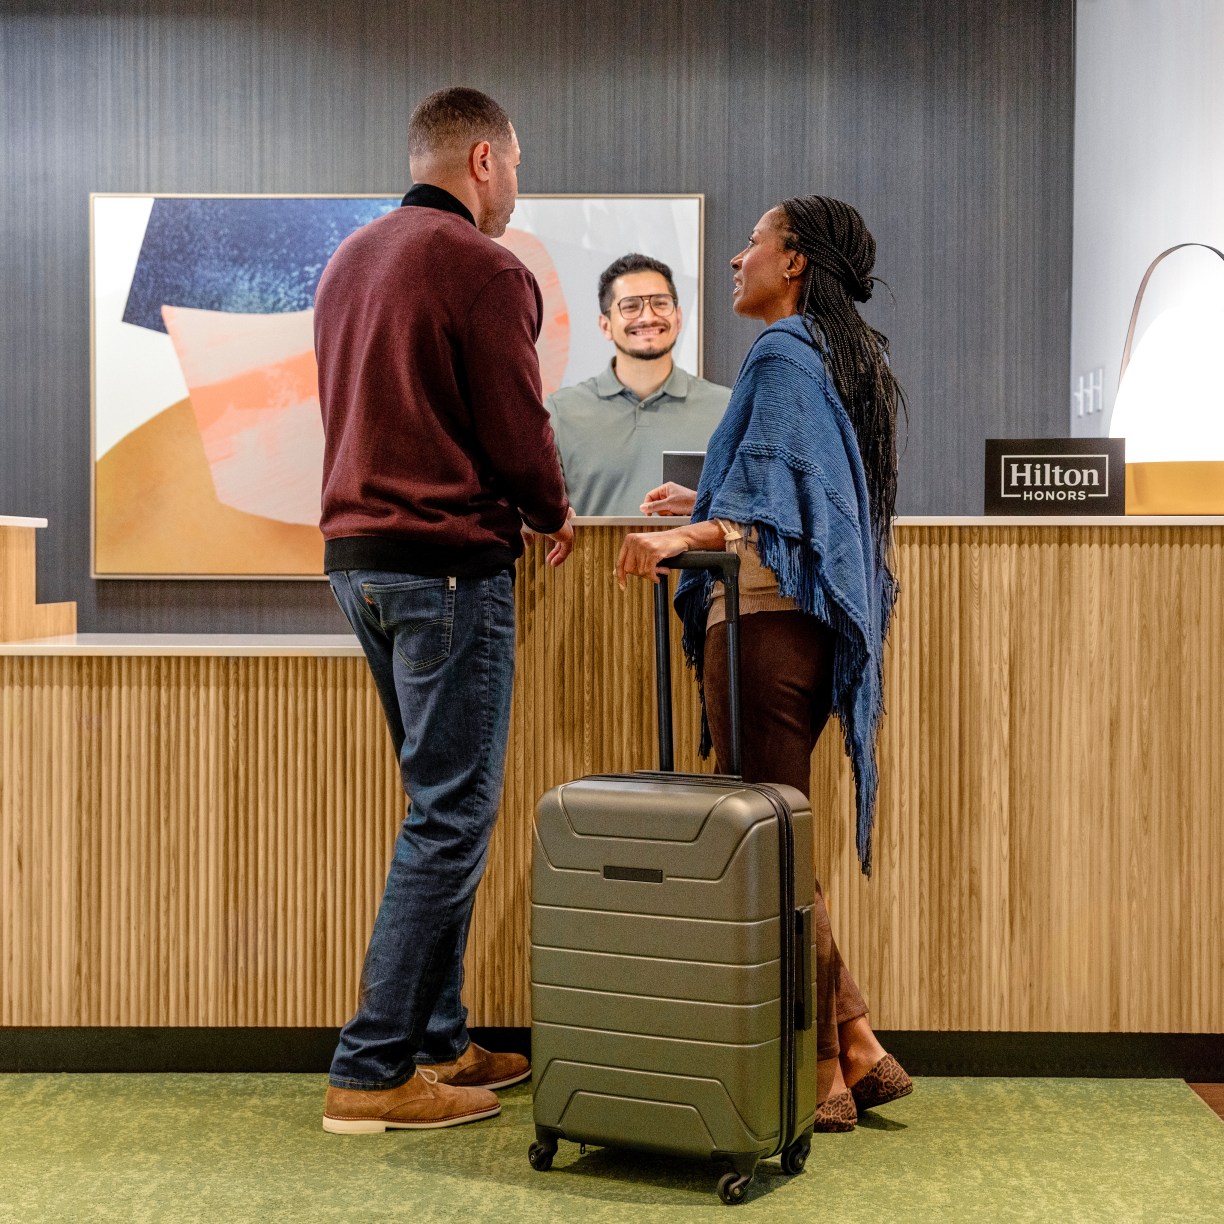 hilton team member greets hotel guests at front desk at Spark by Hilton a new hotel brand